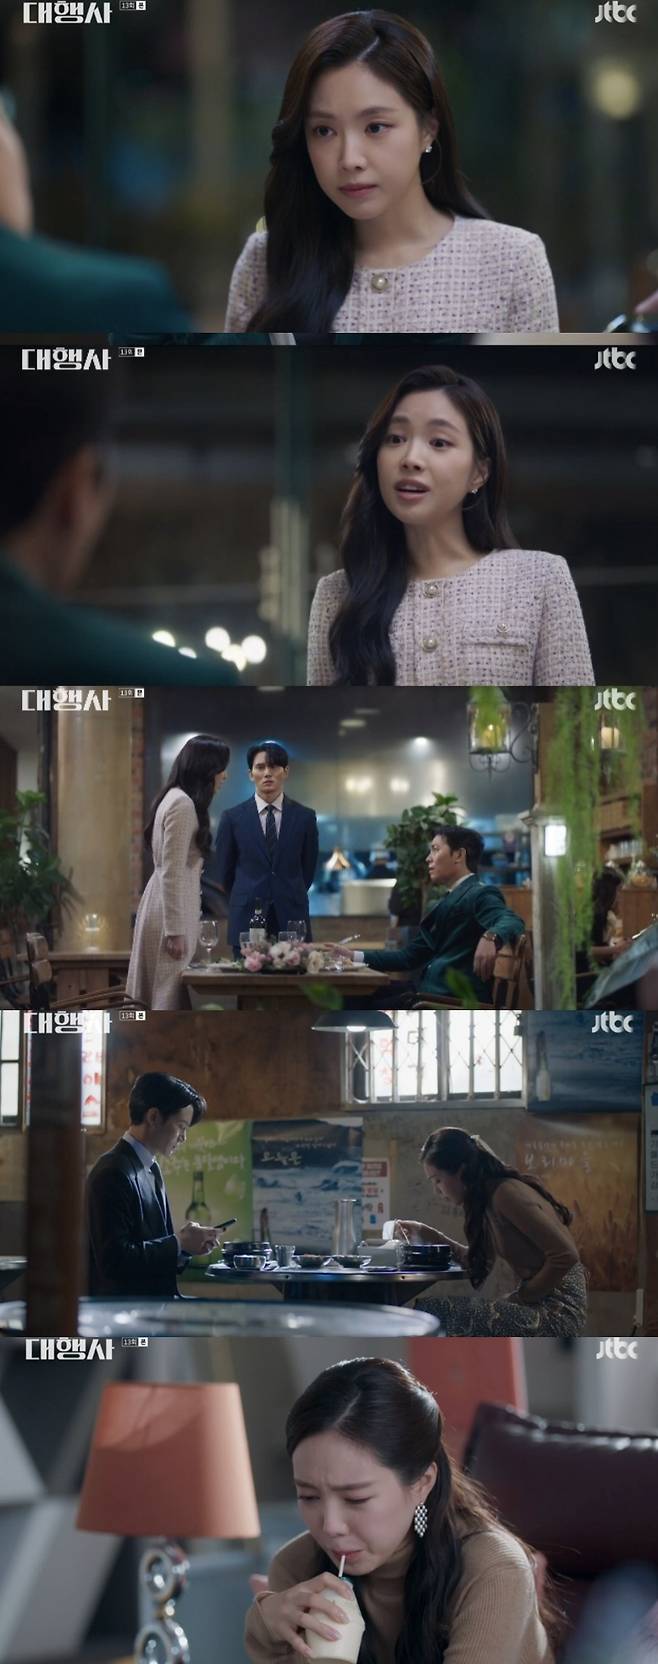 I wonder if Son Na-eun will show his endearment to Acting.JTBCs Saturday-Sunday drama An Agency is running toward its final highlight.In An Agency, which aired on Wednesday, images of orphaned orphans (Lee Bo-young) and Kang Han-Na (Son Na-eun) in crisis were depicted.Park Yung-woo (Han Jung-woo) informed Kang Han-Na to protect Kang Han-Na from strong water (Jo Bok-rae), and the orphan was betrayed by Jang Hyun-sung, who was taken over by choi Chang-soo (Jo Sung-ha).Kang Han-Na and Kang Han-Na, who lost their precious people in the situation where they left only three times to the end, were enough to raise dramatic tension.In particular, in the trailer, Kang Han-Na reached out to the orphans, saying, Use me, and the orphans seemed to be anticipating a counterattack, saying, Its not over until its over.Now an agency is going to draw a last-minute battle for the finale. What matters at this point is Son Na-euns Acting power.Son Na-eun was named alongside Lee Bo-young in the role of Kang Han-Na, a strategist who burns ambition for group succession and has a passion for Park Yung-woo.However, at the beginning of the first broadcast, Son Na-euns acting power was on the board. Unnatural facial expressions, inaccurate pronunciations, and rigid and awkward expressions of emotion were overshadowed by the title of Sub Yeoju.Lee Bo-young, who showed perfect acting for each piece, pointed out that he was only holding an ankle, but since an agency is a pre-production drama, viewer feedback can not be applied.Public opinion was bound to get worse and worse.In addition, Son Na-eun signed exclusive contract with YG Entertainment alone, and did not participate in the activities of A-pink, and withdrew to the team saying that he would concentrate on actor activities at all.Even if you burn your passion for Acting, you can not escape from Acting Stone even if you have more than 10 years of Acting experience. It is said that you can not afford the big title of No. 2 Yeoju.What viewers want to see is Actors Acting, which is completely immersed in the drama, not Son Na-euns growing drama.Now it is time for Son Na-euns role to become important.One Mans War with Lee Bo-young, the characters unique strategist, the characters growth to find his identity out of the property of the chaebol, and the romance with Han Jung-woo. There are so many things to show and persuade.As I have not been able to show the characters narrative properly for 13 times, Son Na-eun has no time.It is noteworthy whether Son Na-eun will be able to make a clean finish of the drama by showing off his acting.